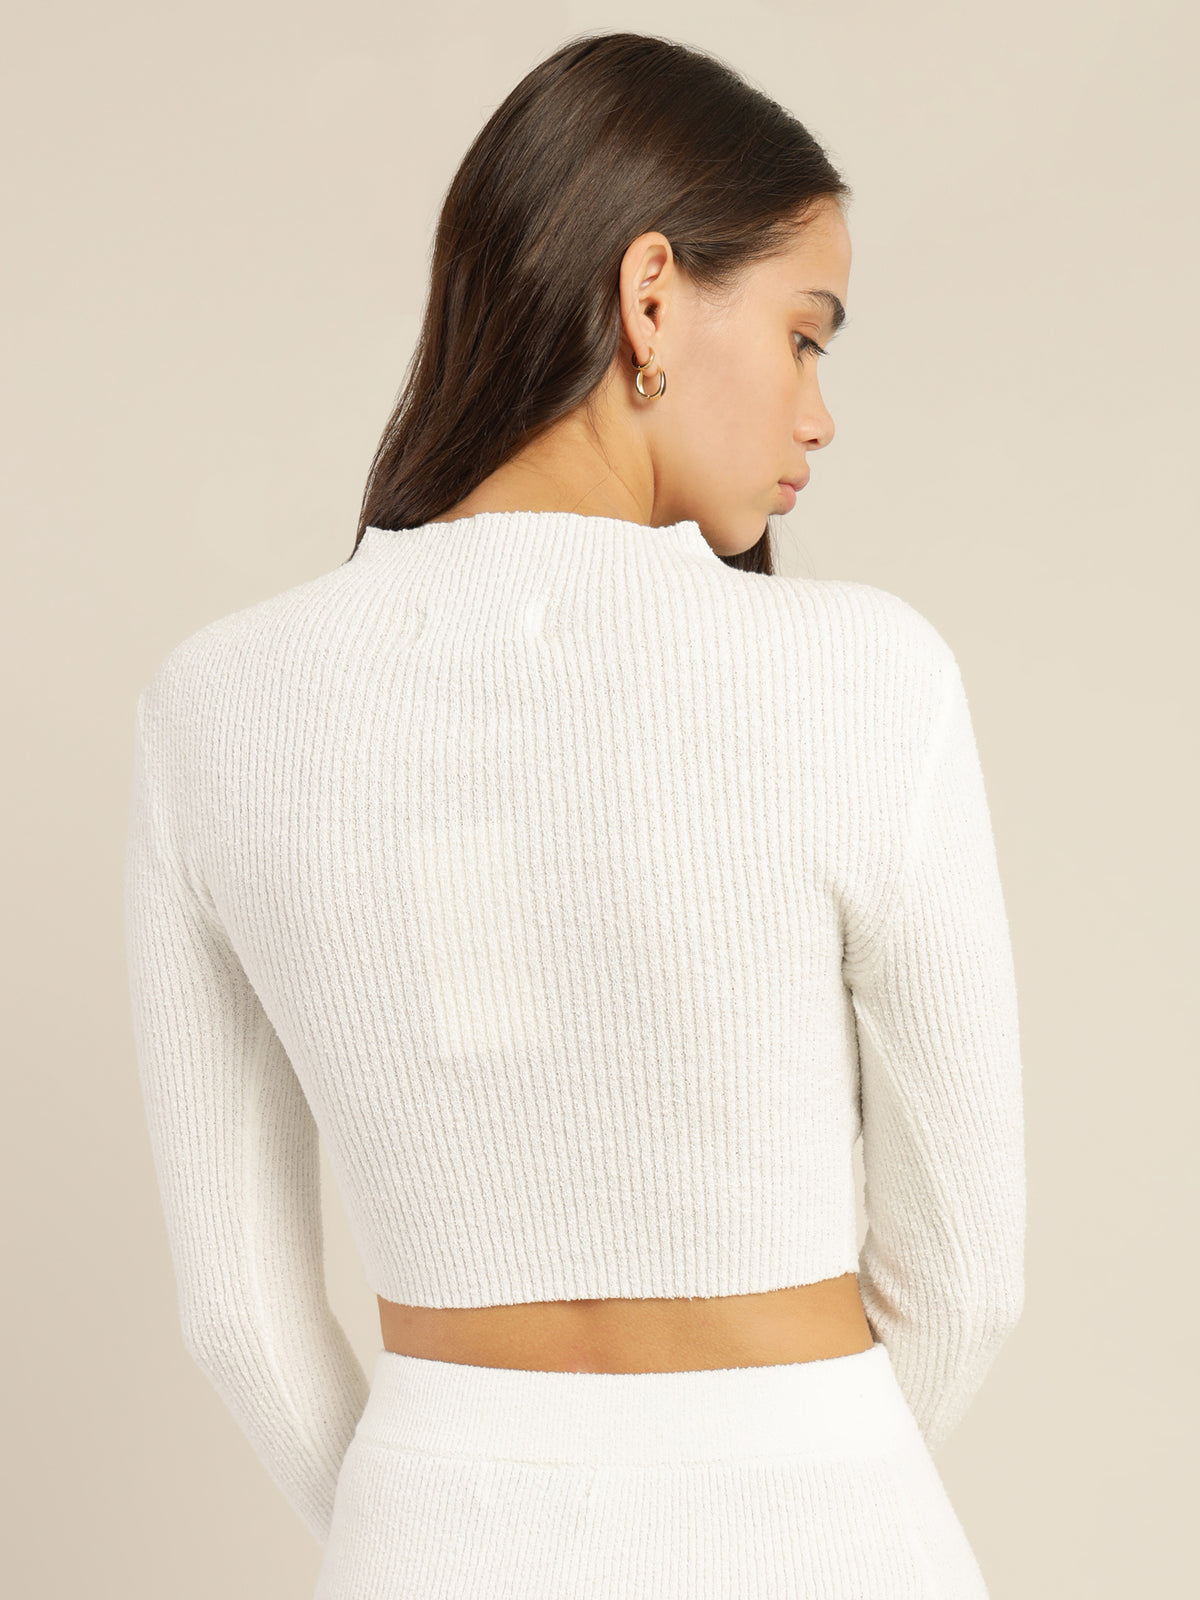 Ivy Knit Top in Ivory White